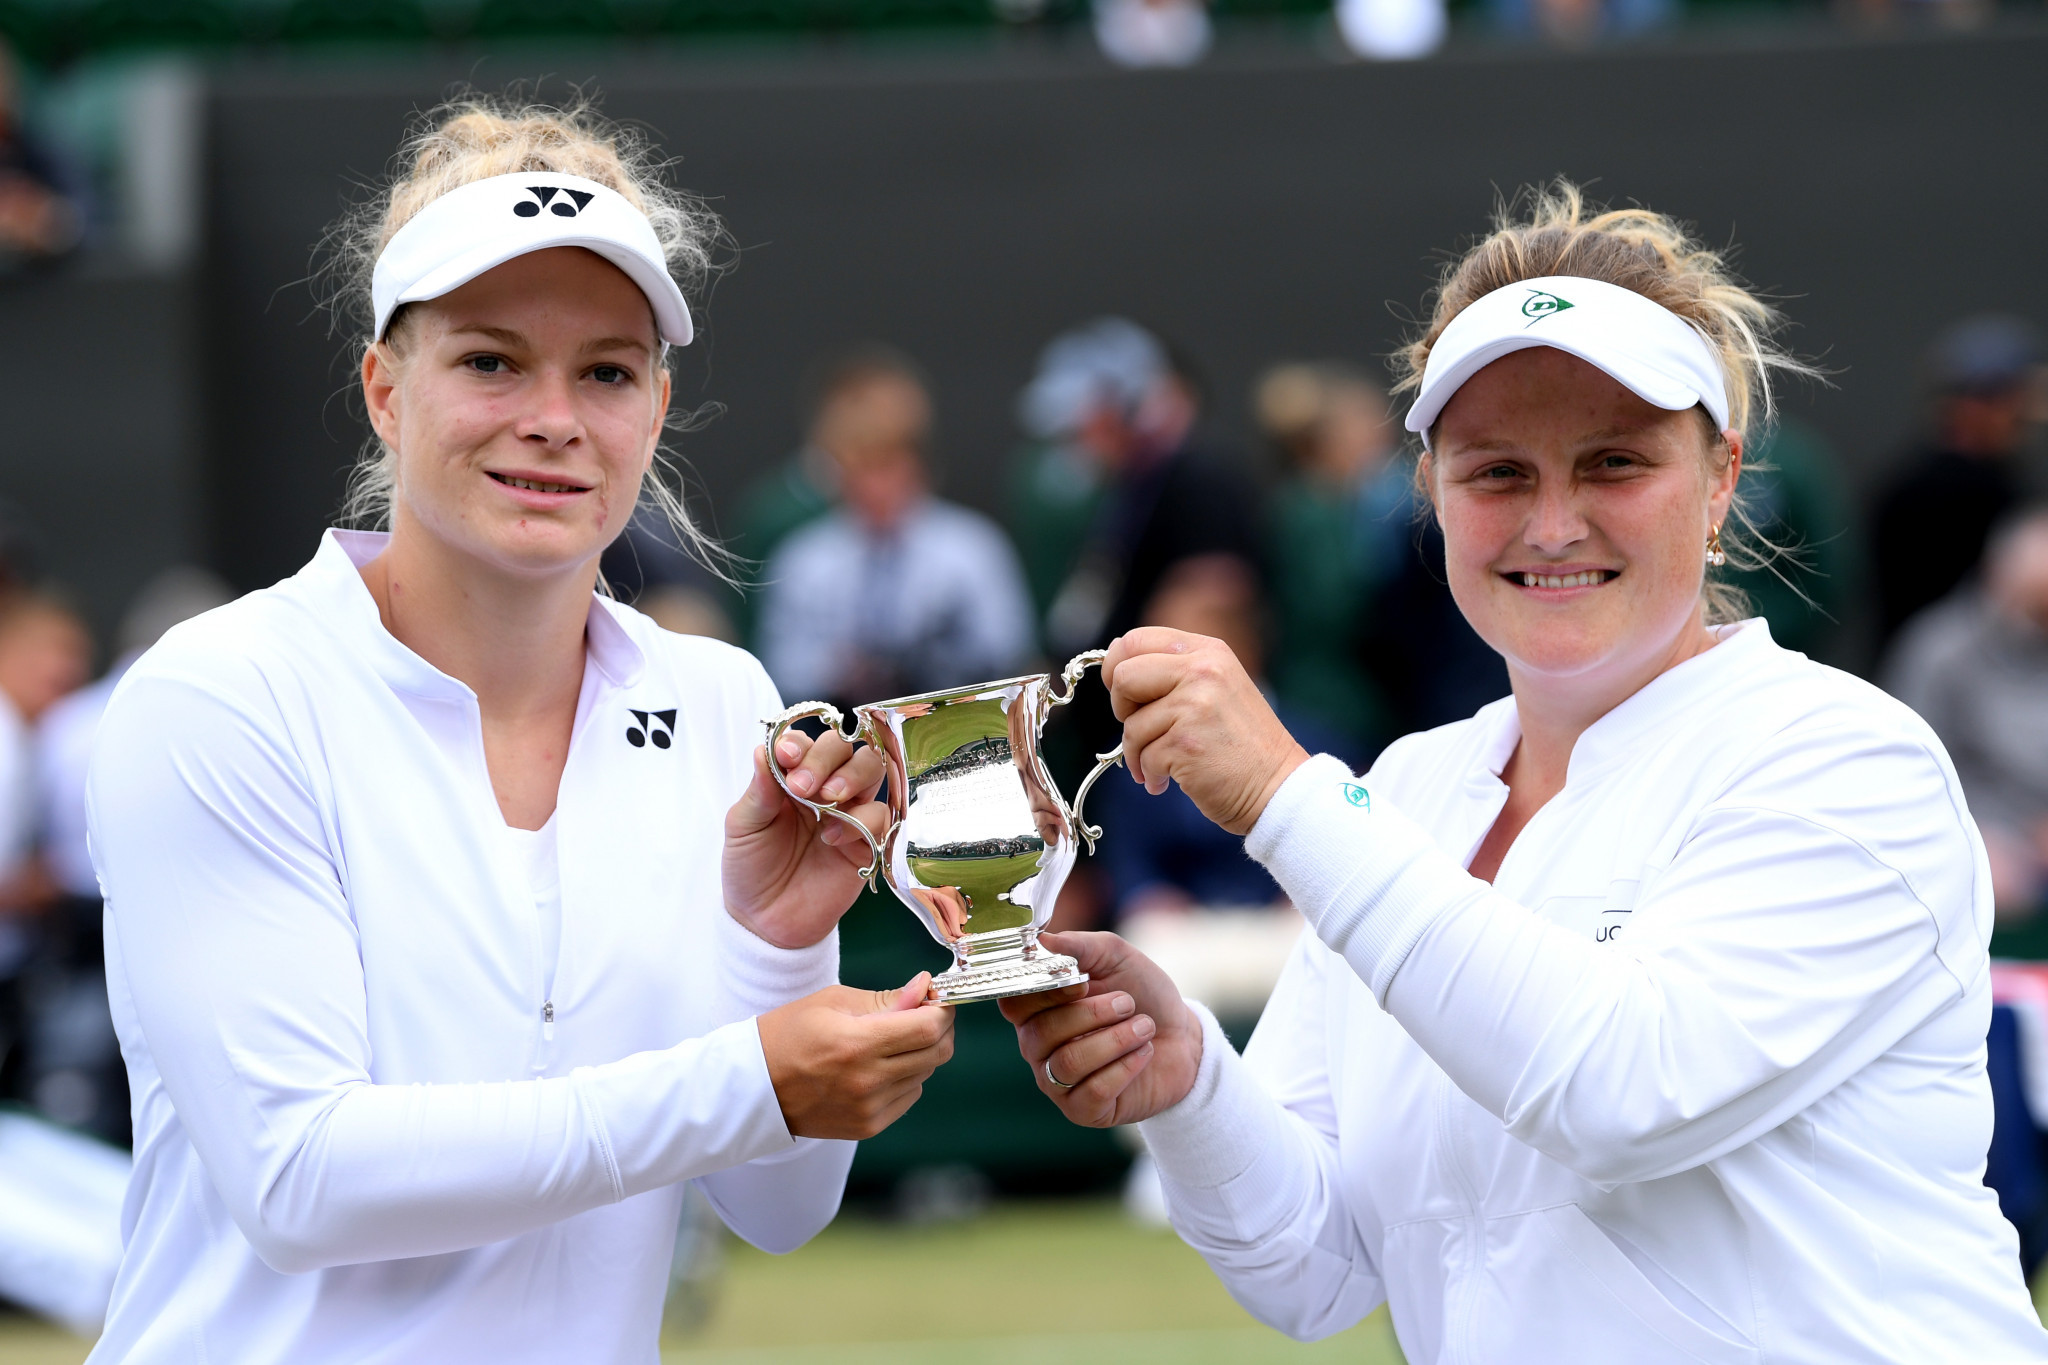 Diede De Groot and Aniek Van Koot of The Netherlands won the women's doubles titles at the UNIQLO Wheelchair Doubles Masters in Orlando having already triumphed at Wimbledon this year ©Getty Images